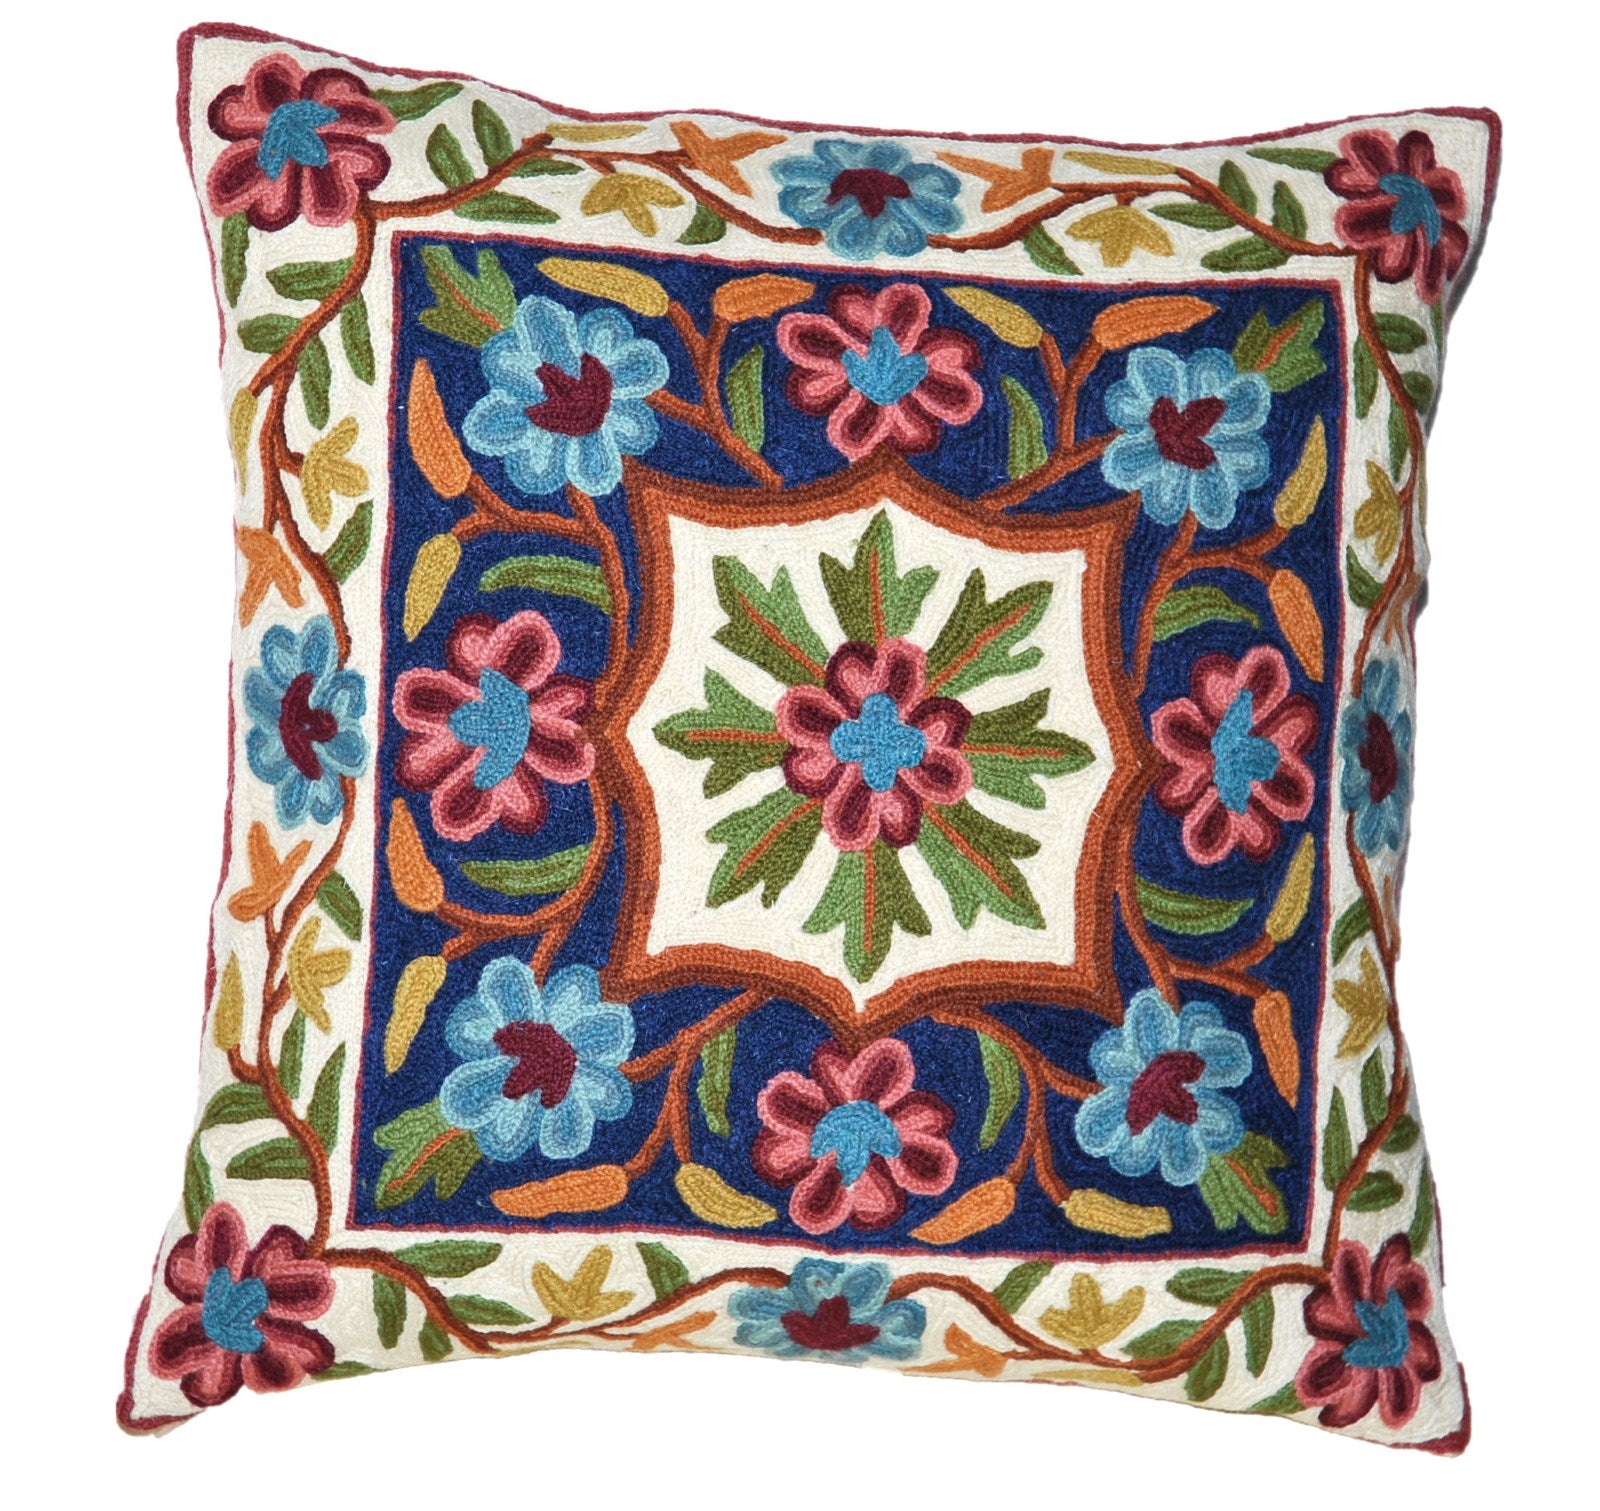 Crewel Wool Embroidered Cushion Throw Pillow Cover, Multicolor #CW1008